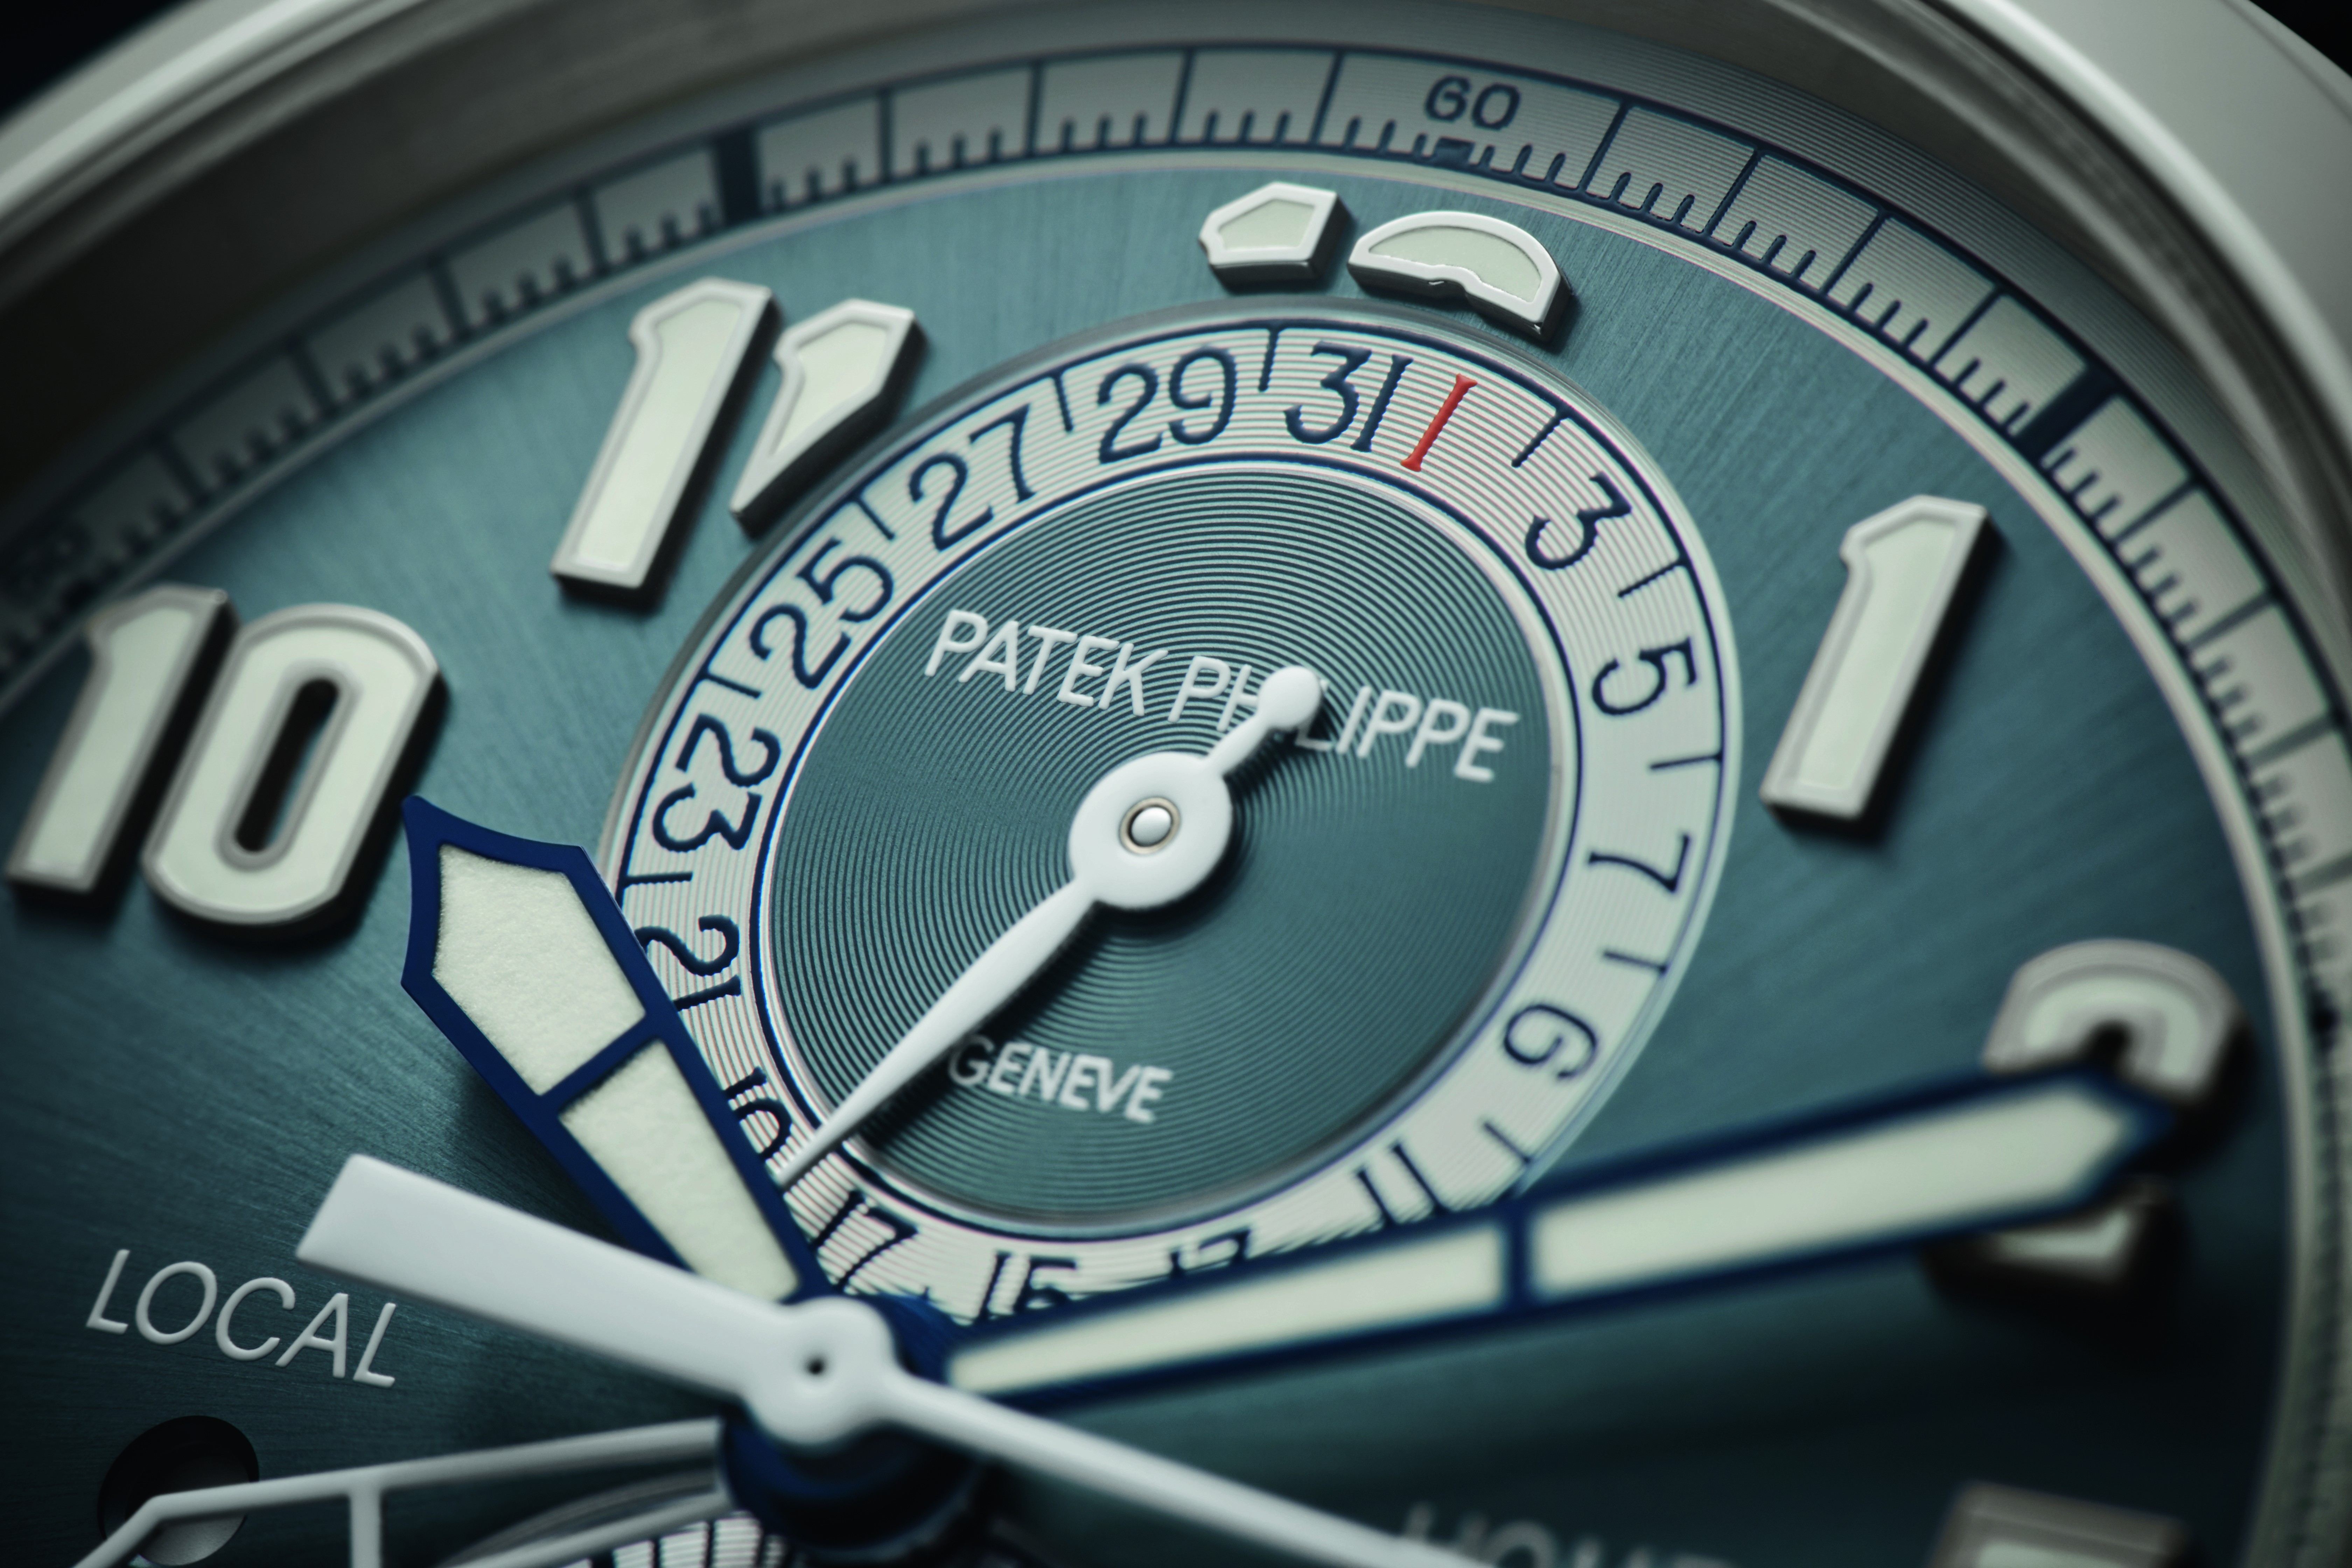 Two New Patek Philippe Chronographs - A Classic Pilots’ Complication